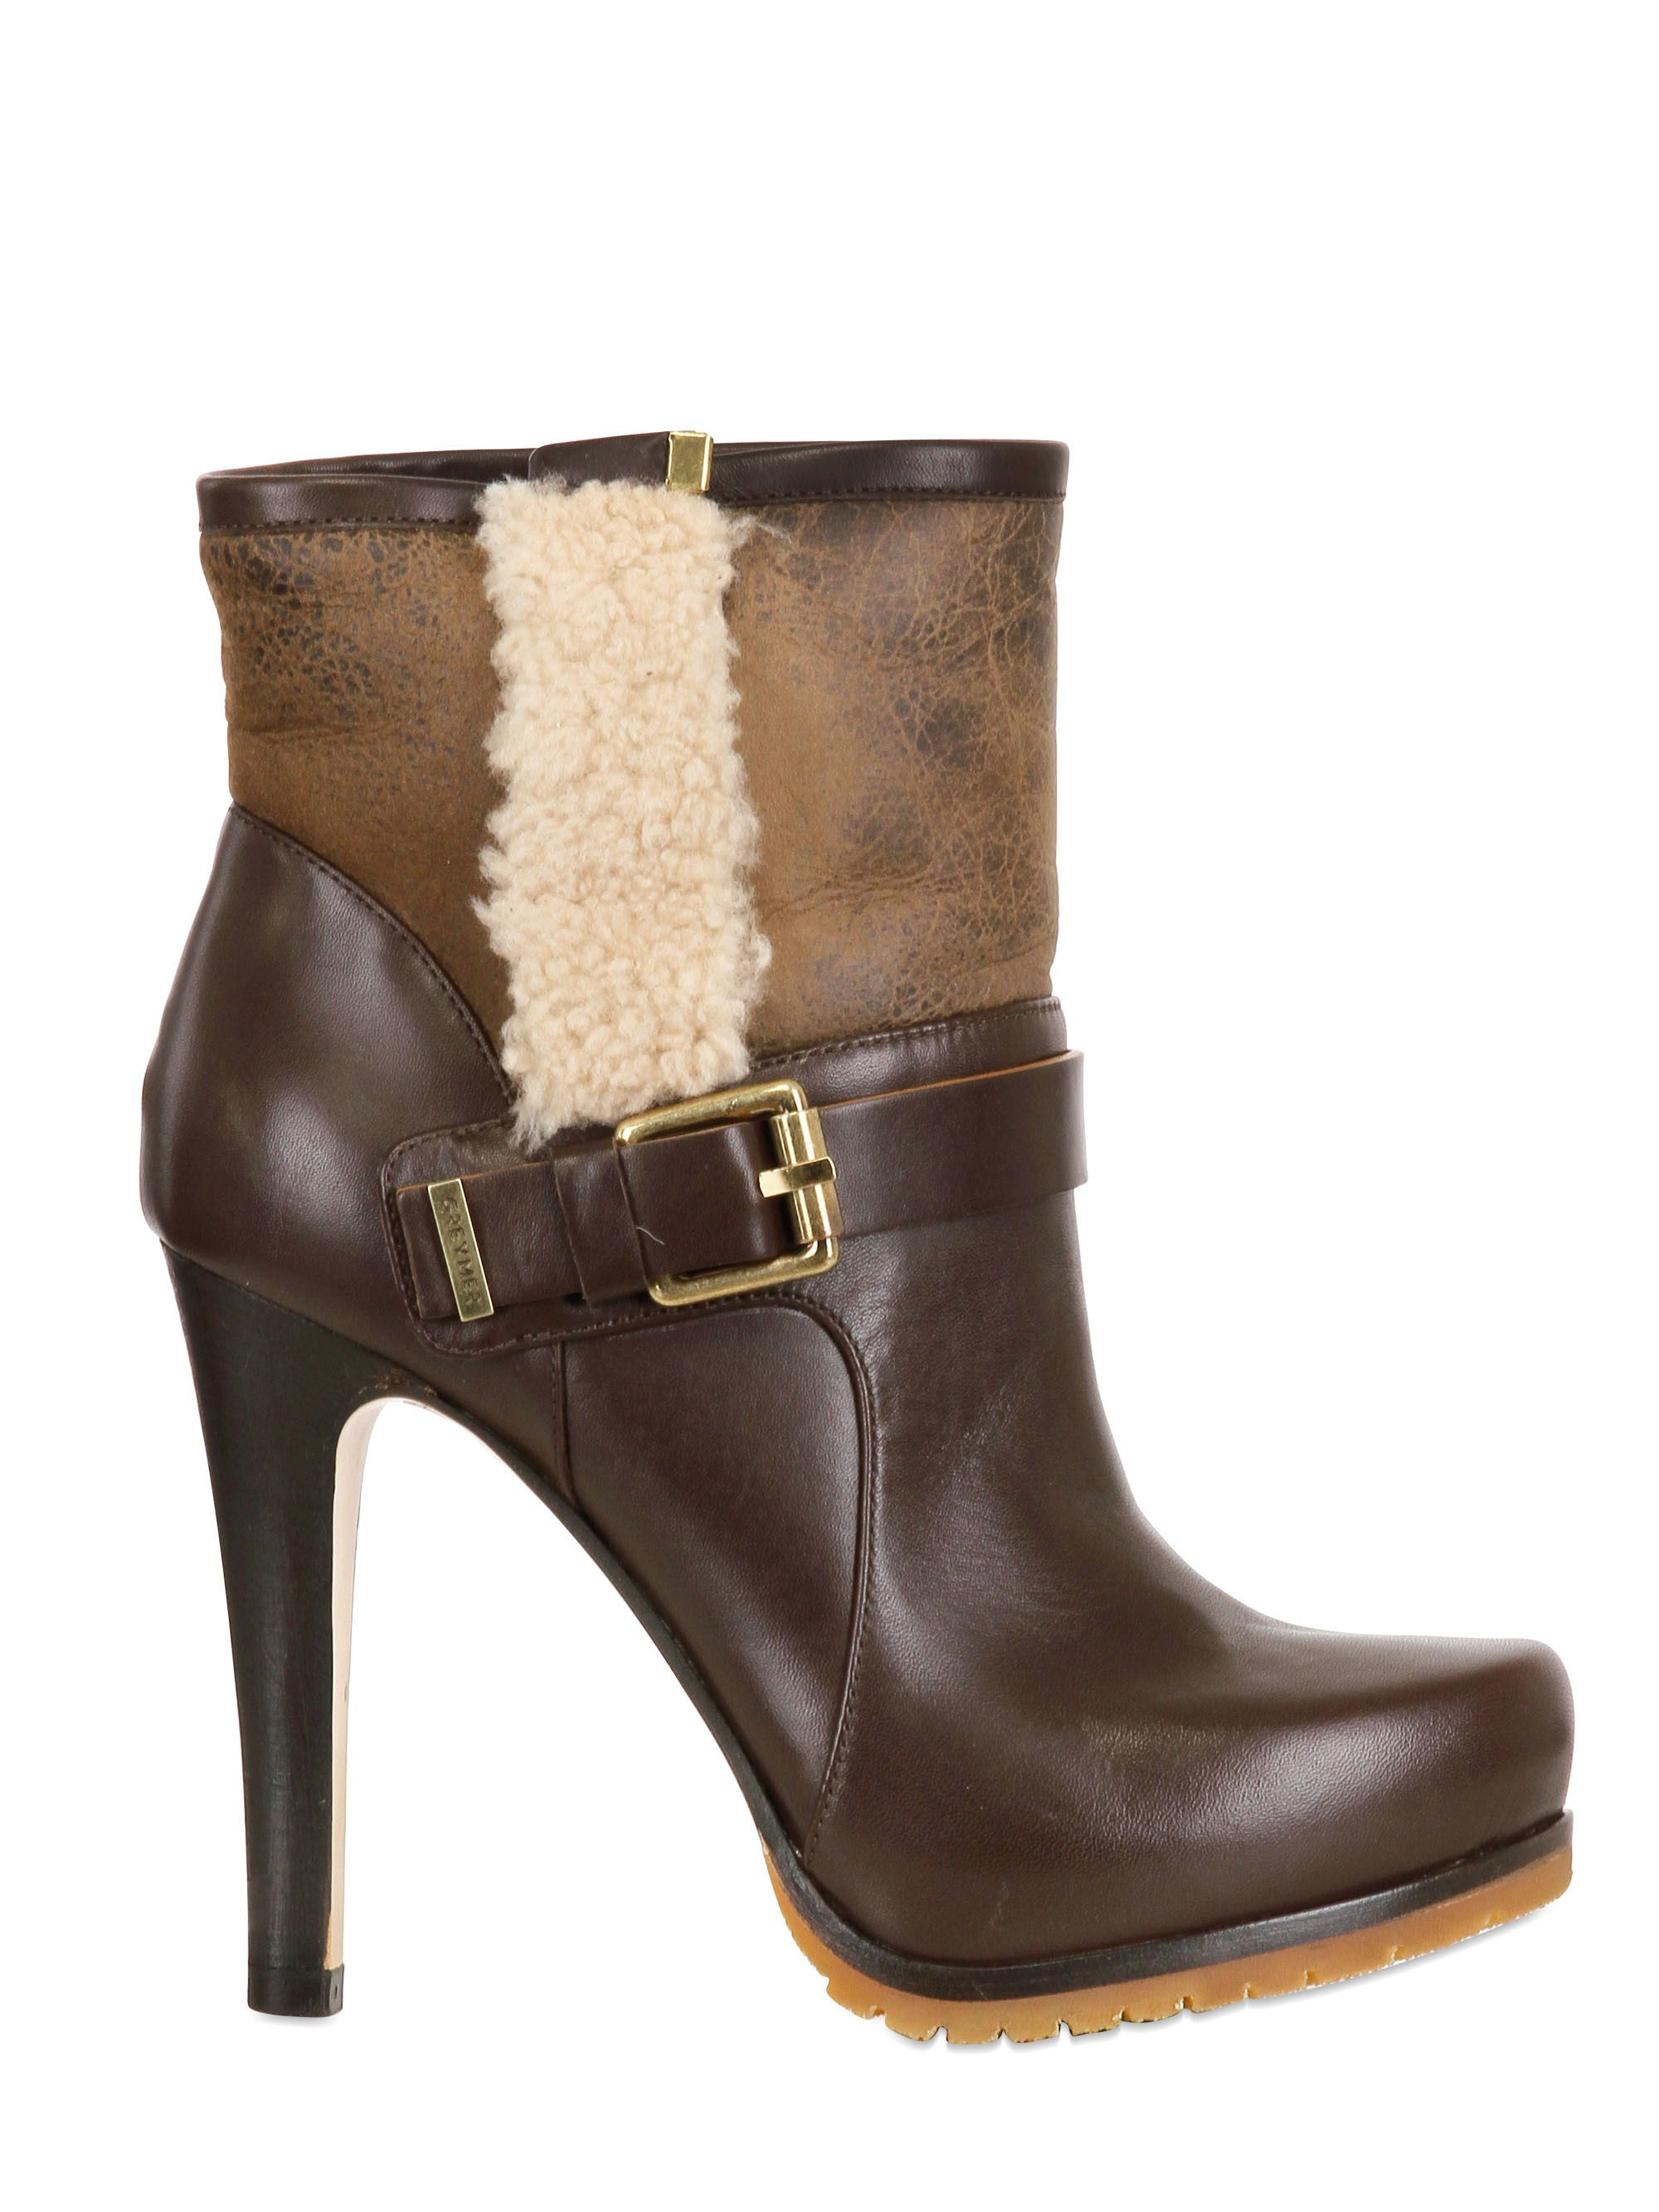 Lyst - Grey Mer 110mm Calf Suede Shearling Boots in Brown